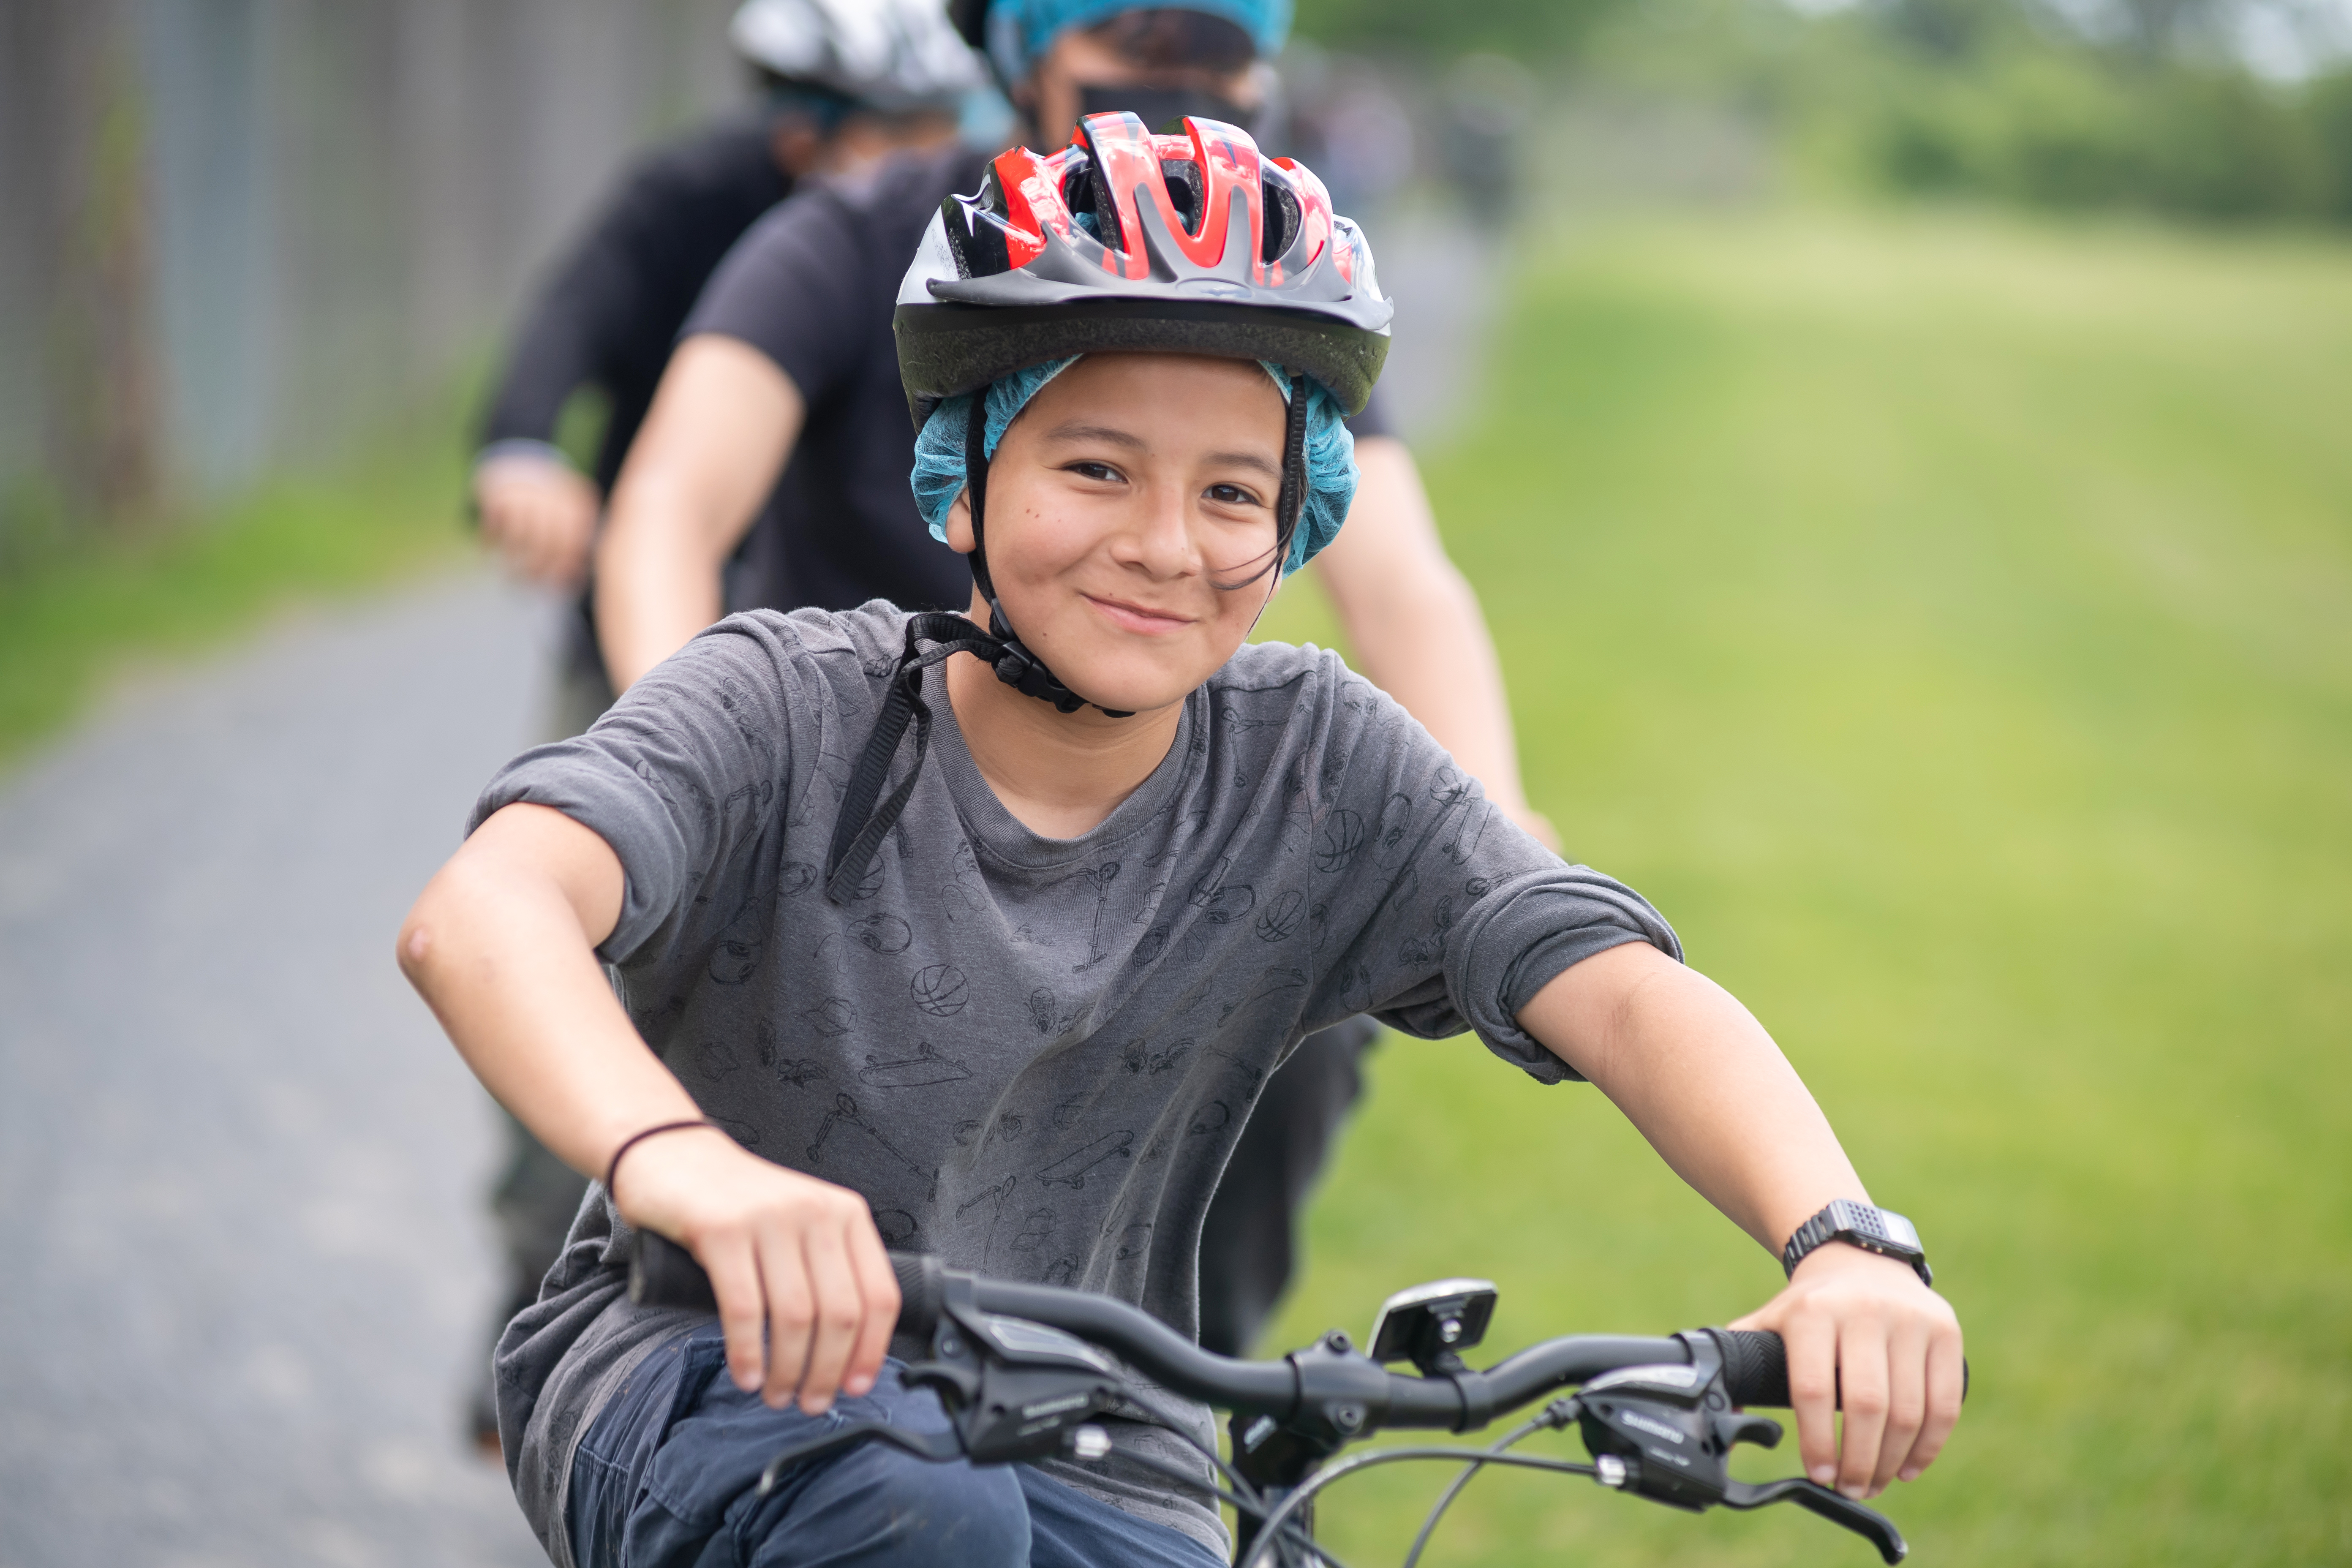 A Poe sixth-grader smiles while riding a bike in physical education class.